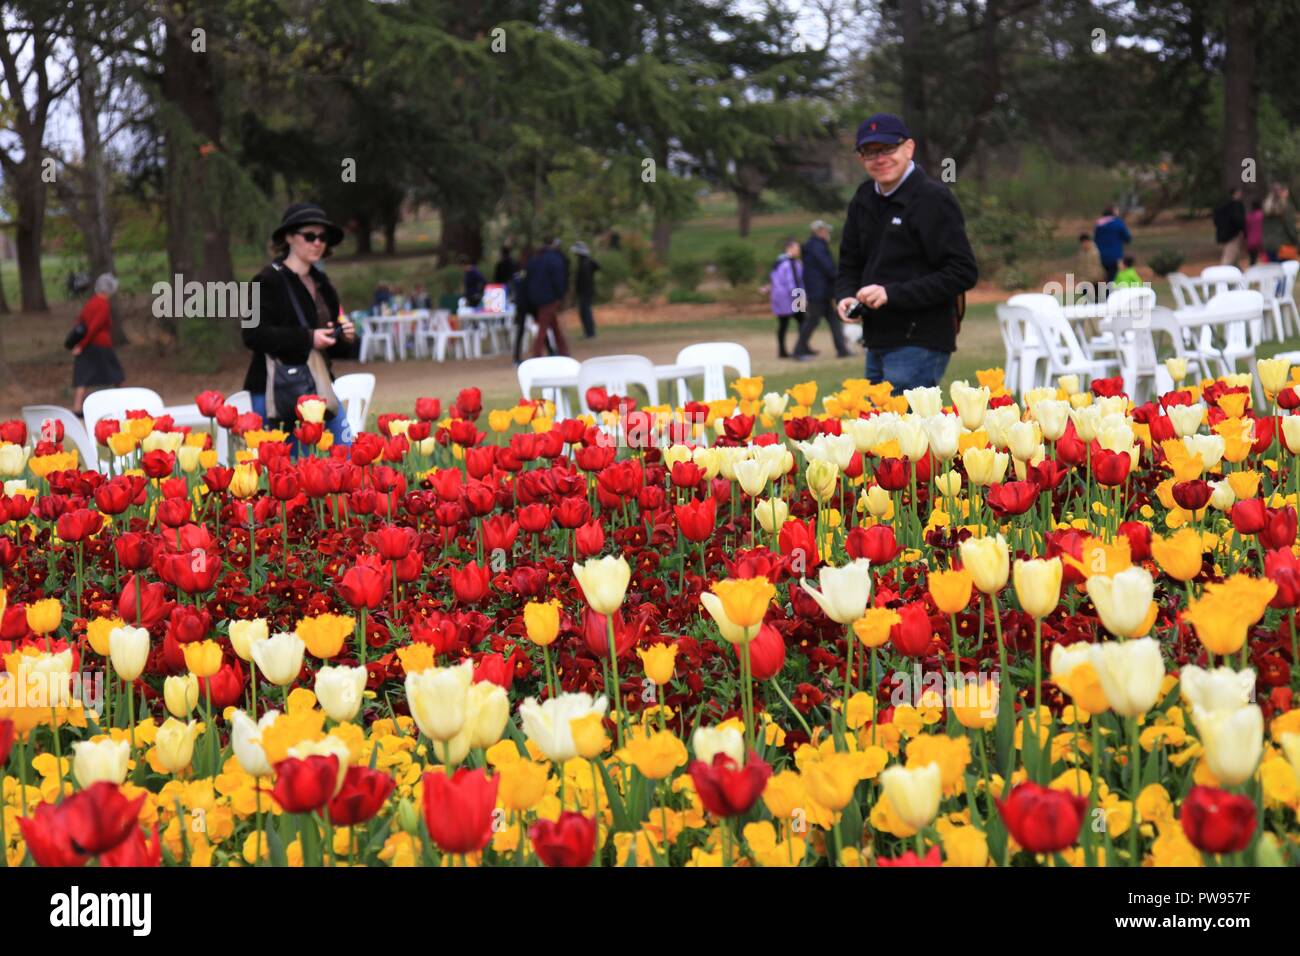 canberra, australia. 14th oct, 2018. people visit floriade, an